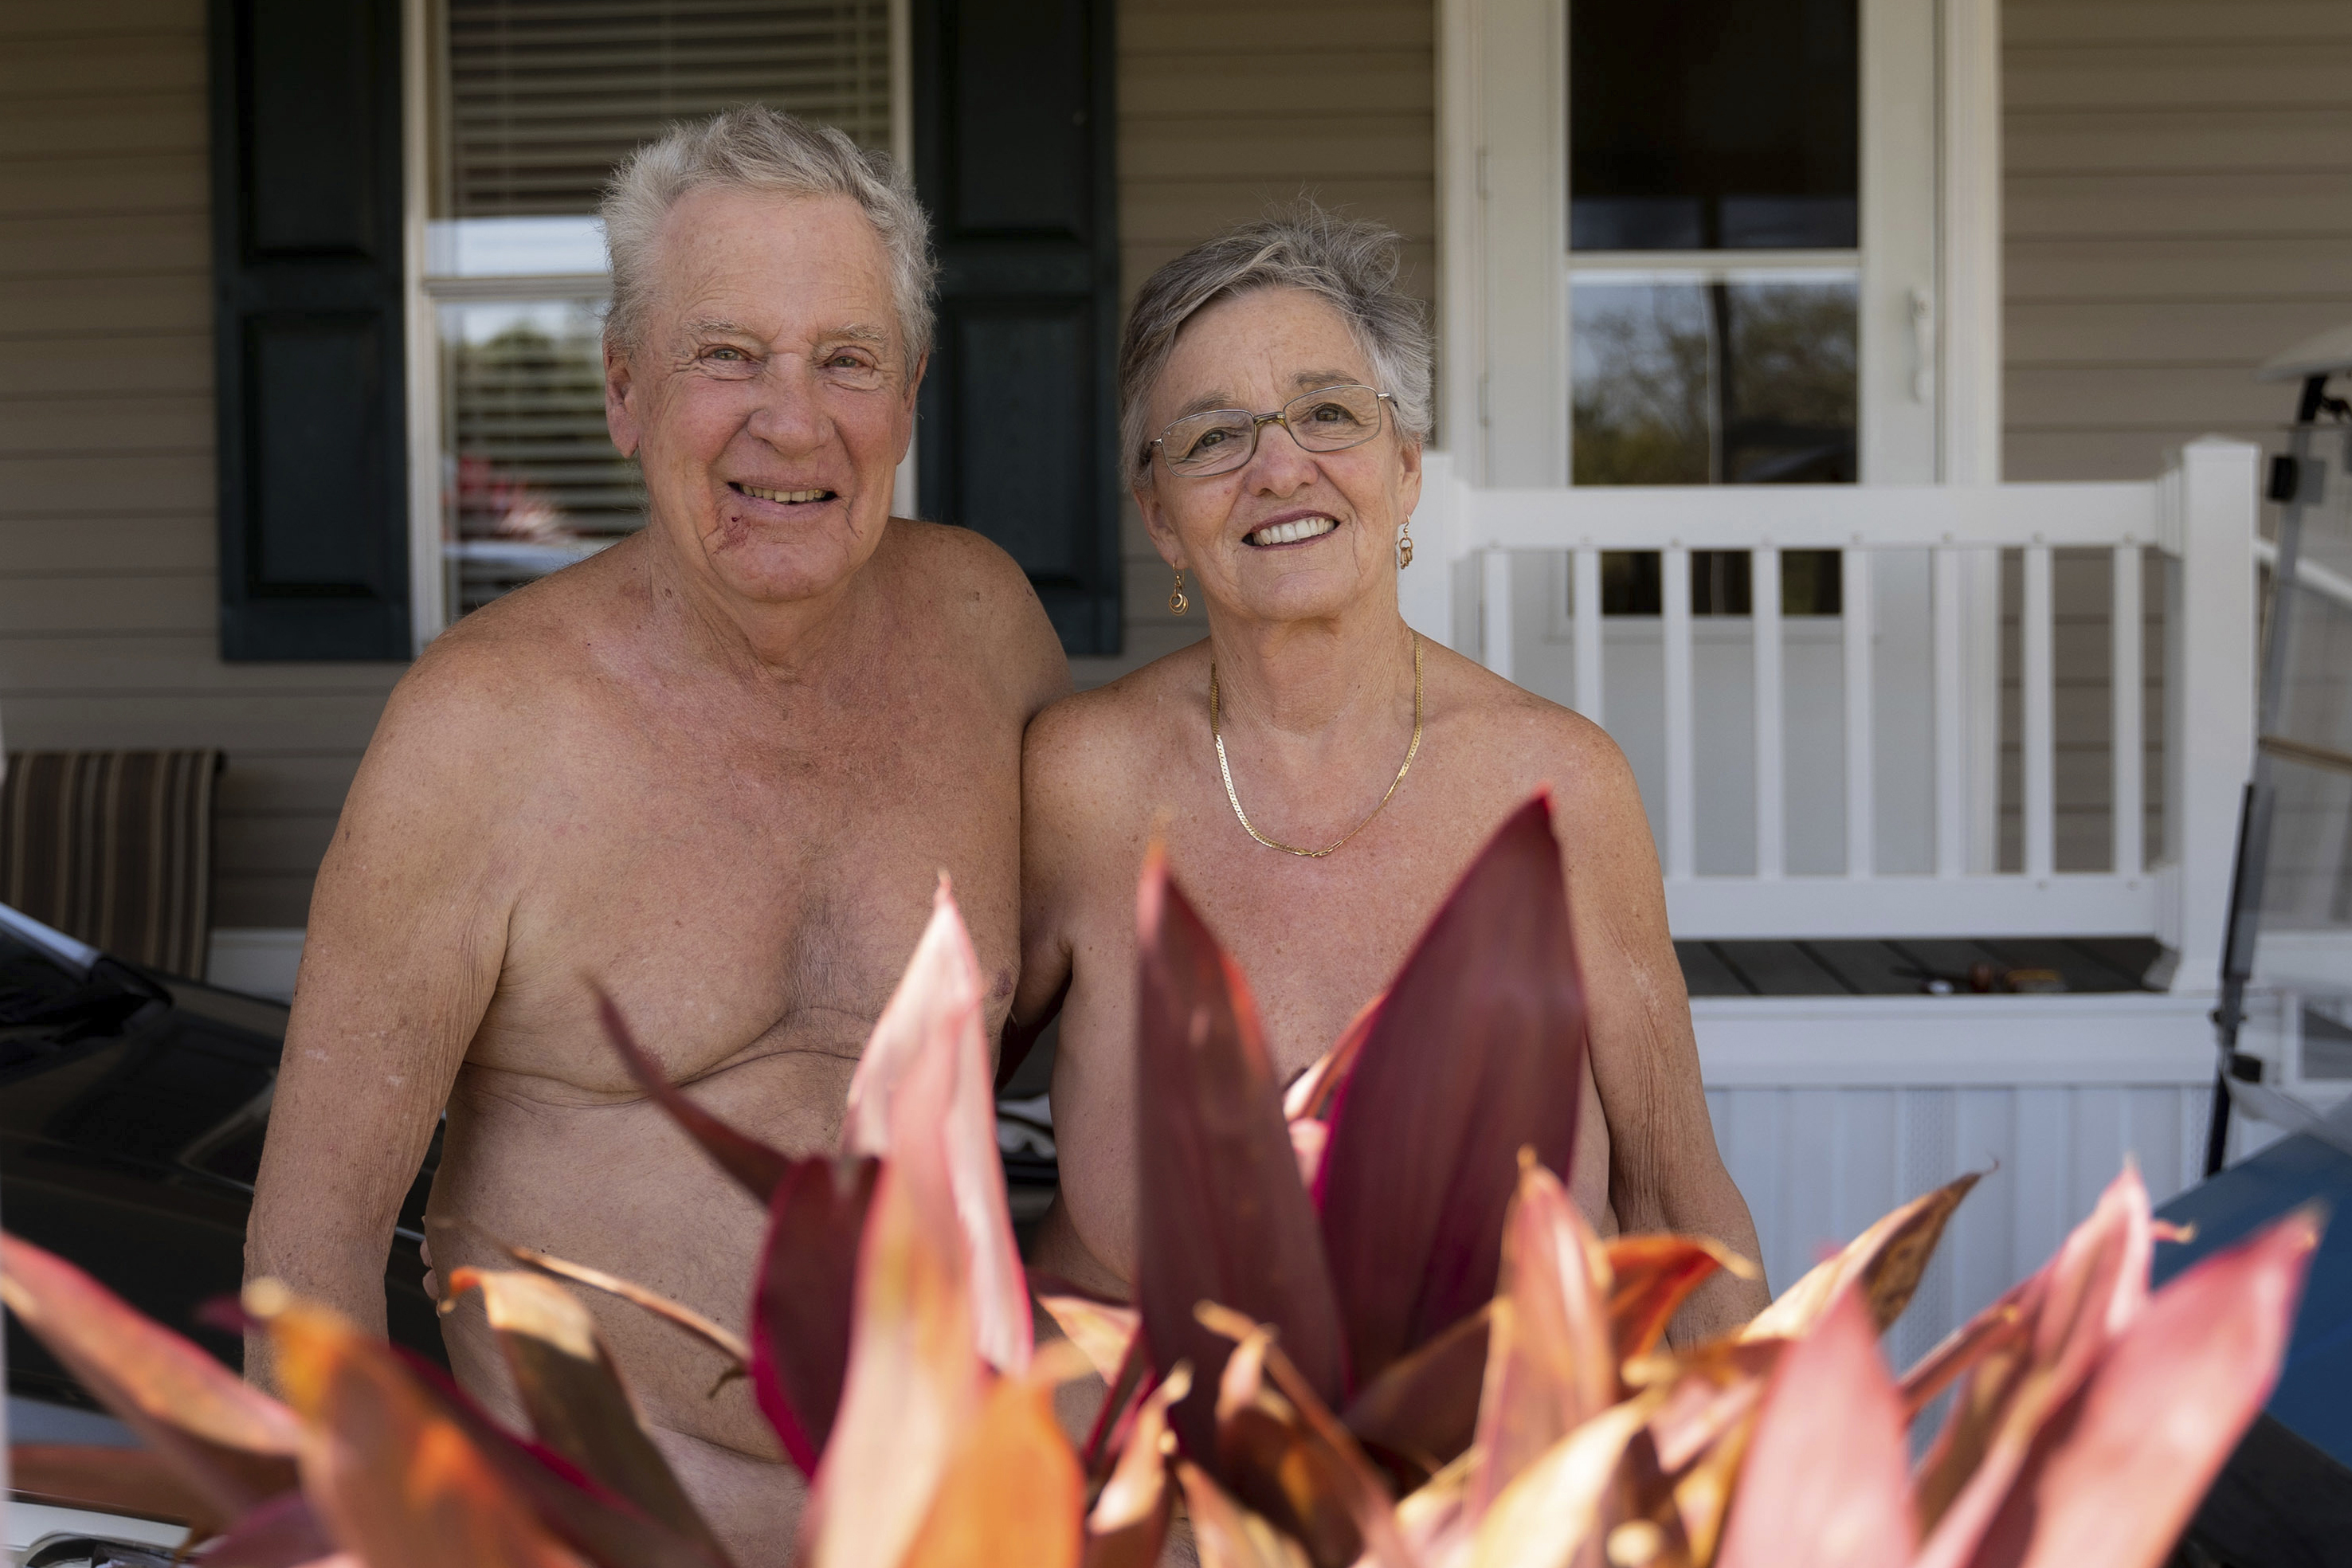 dave donlon recommends nudists of all ages pic